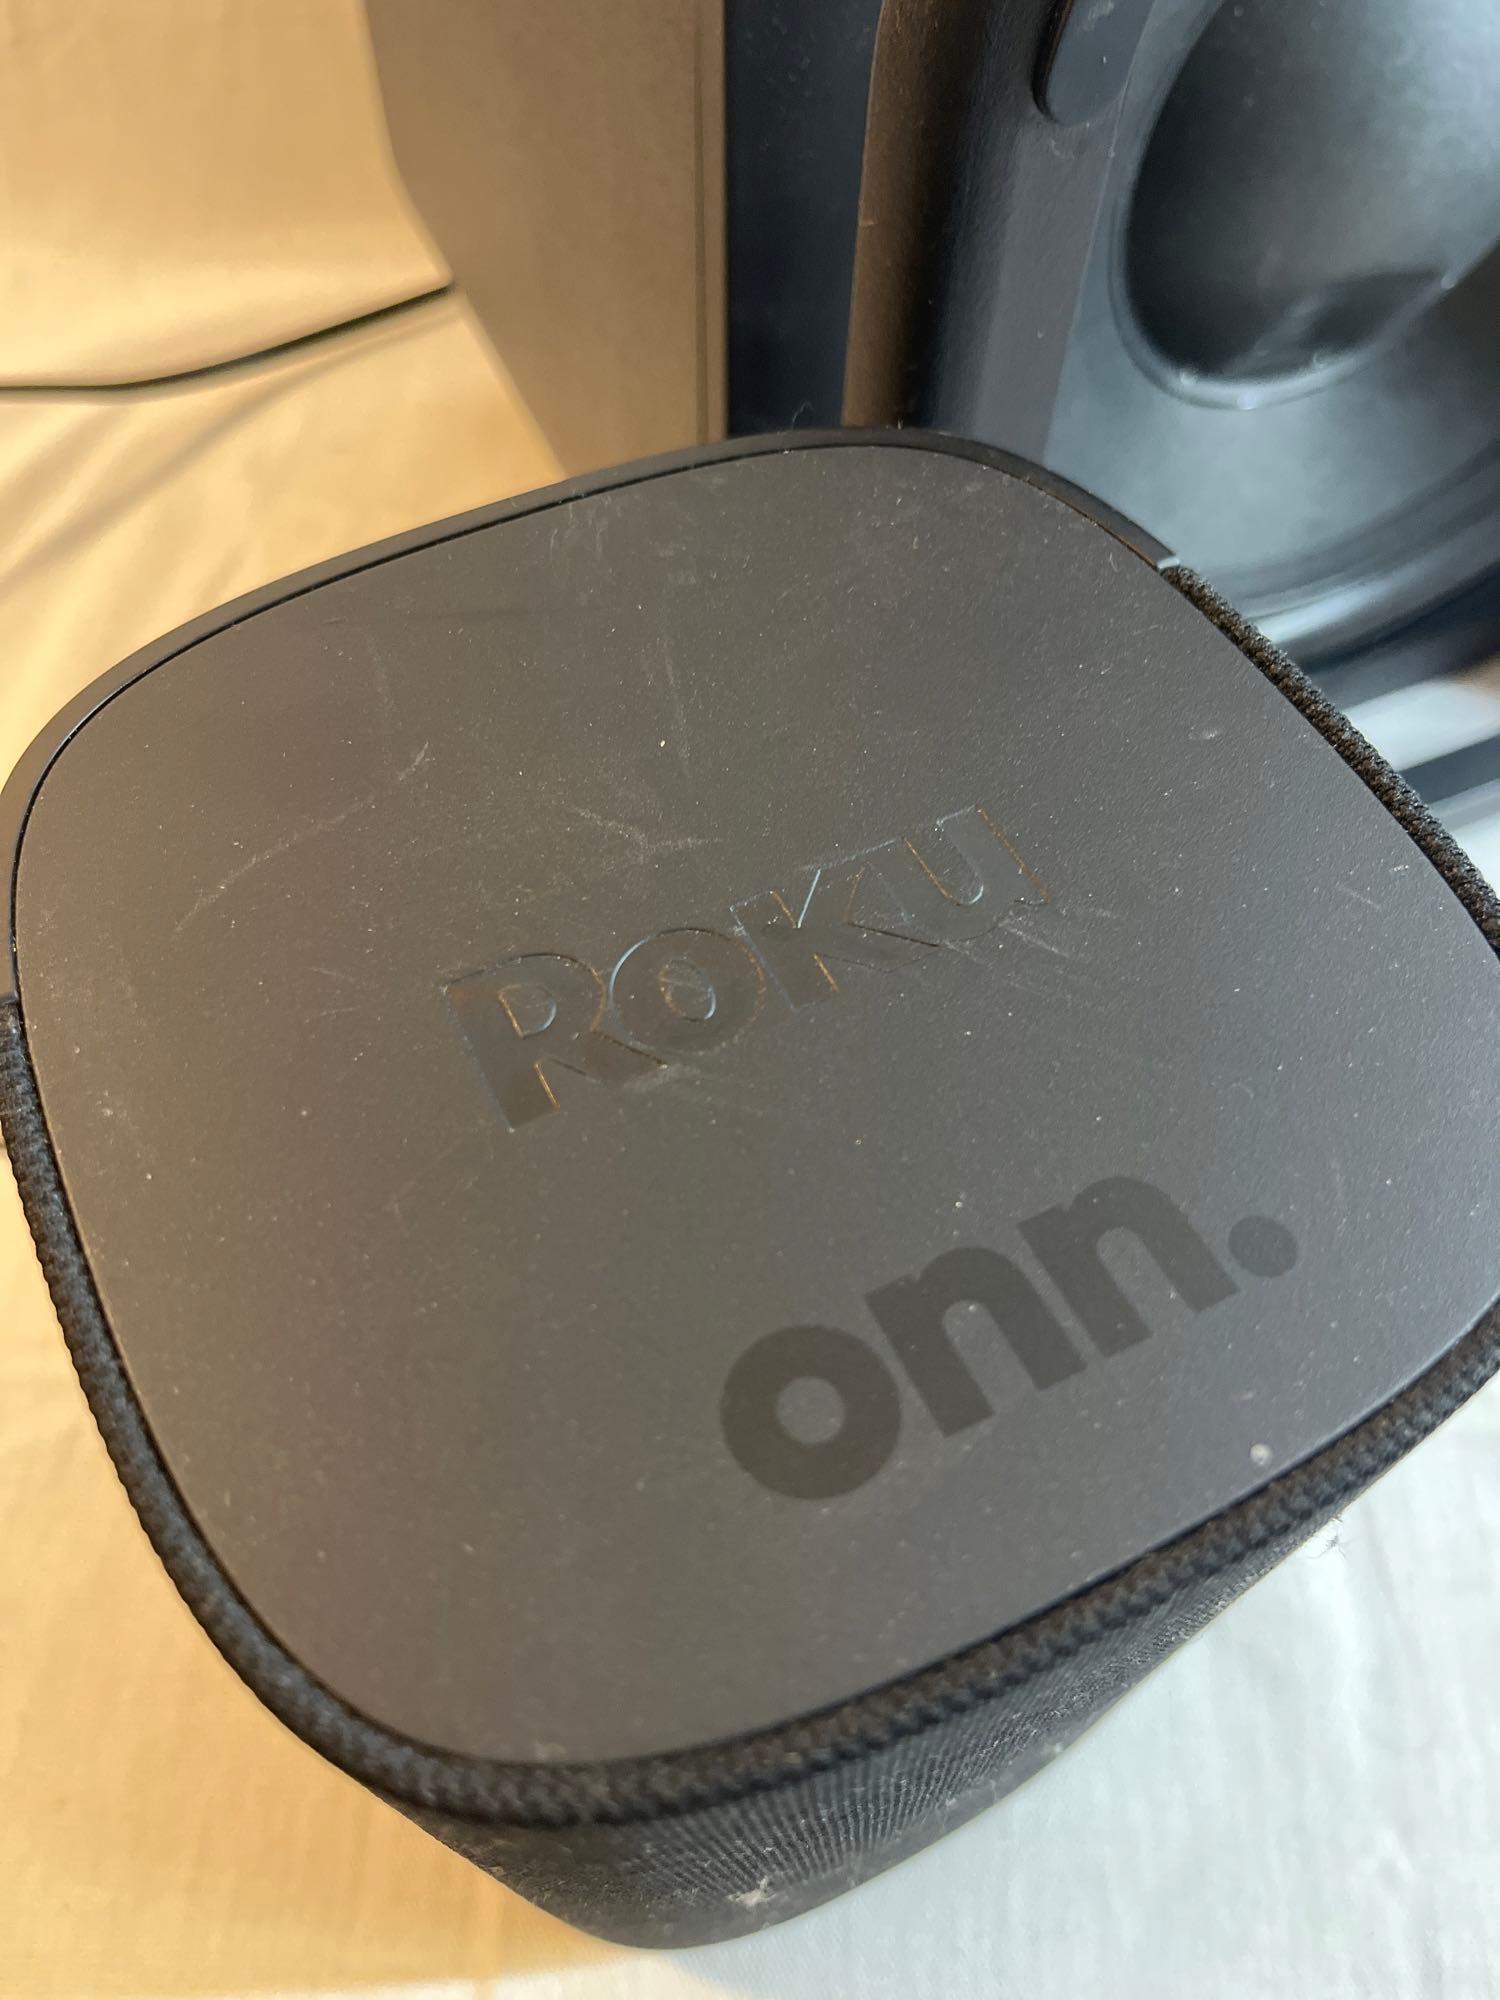 Roku Onn Subwoofer...and...home theater speaker system